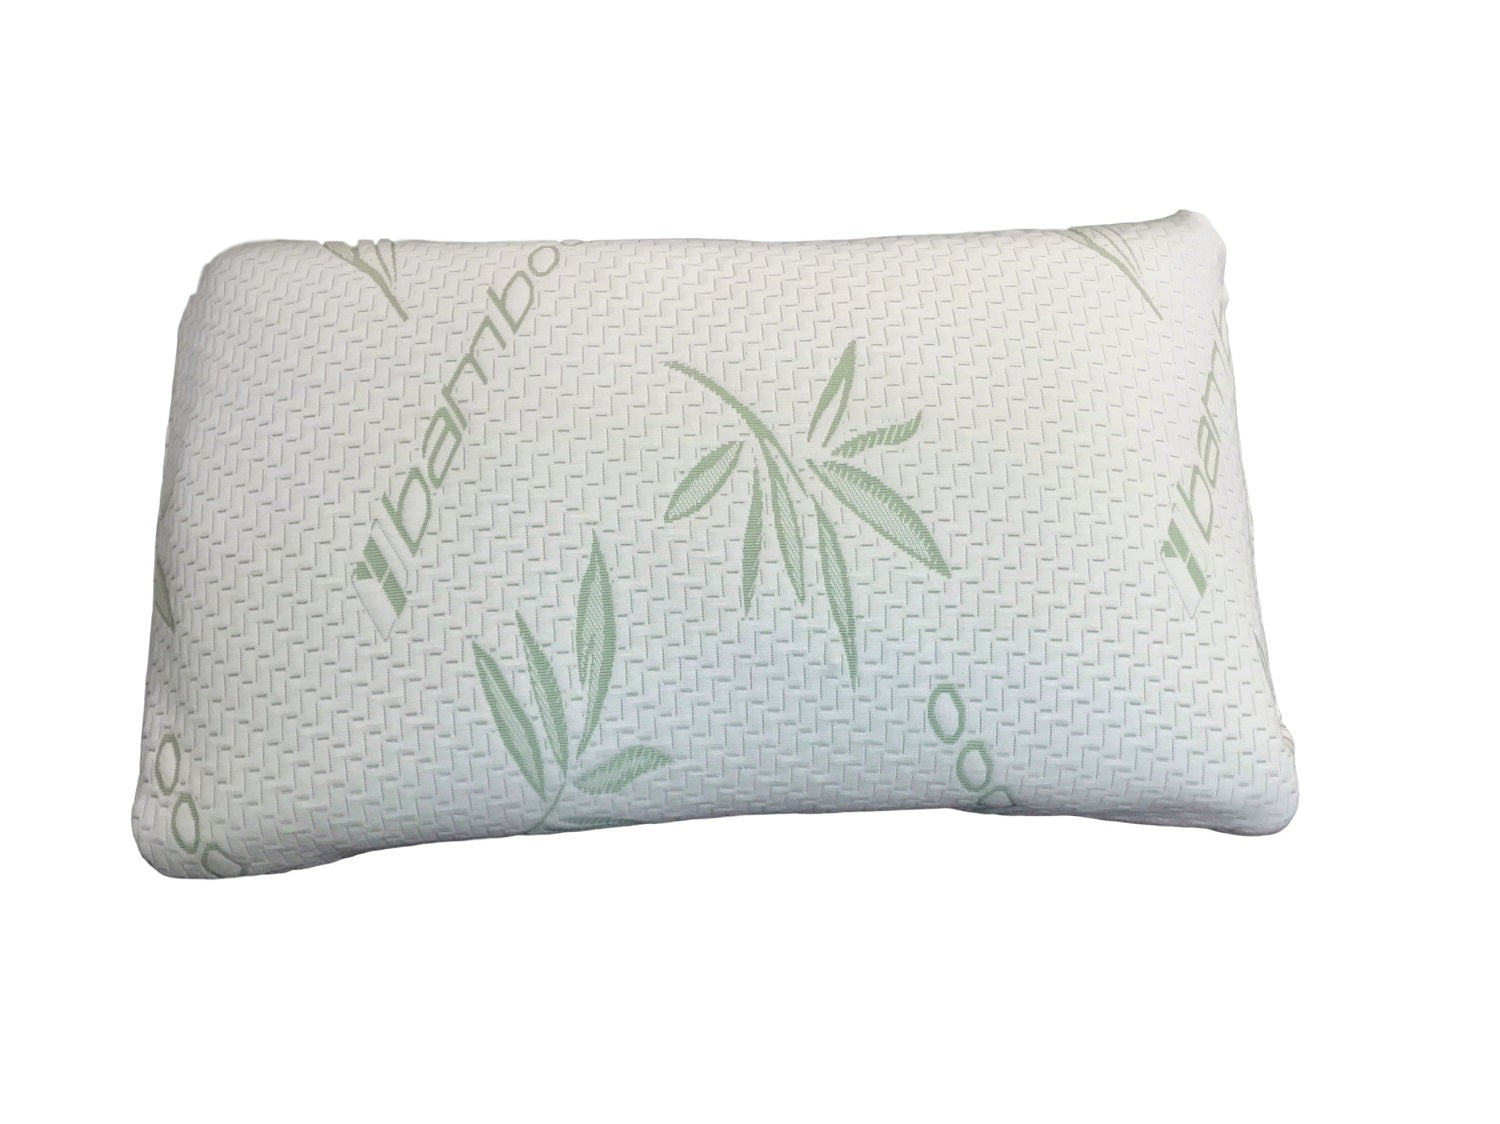 ViscoLogic Shredded Memory Foam pillows with Cool Bamboo Mix Fabric (Queen) Set of 2